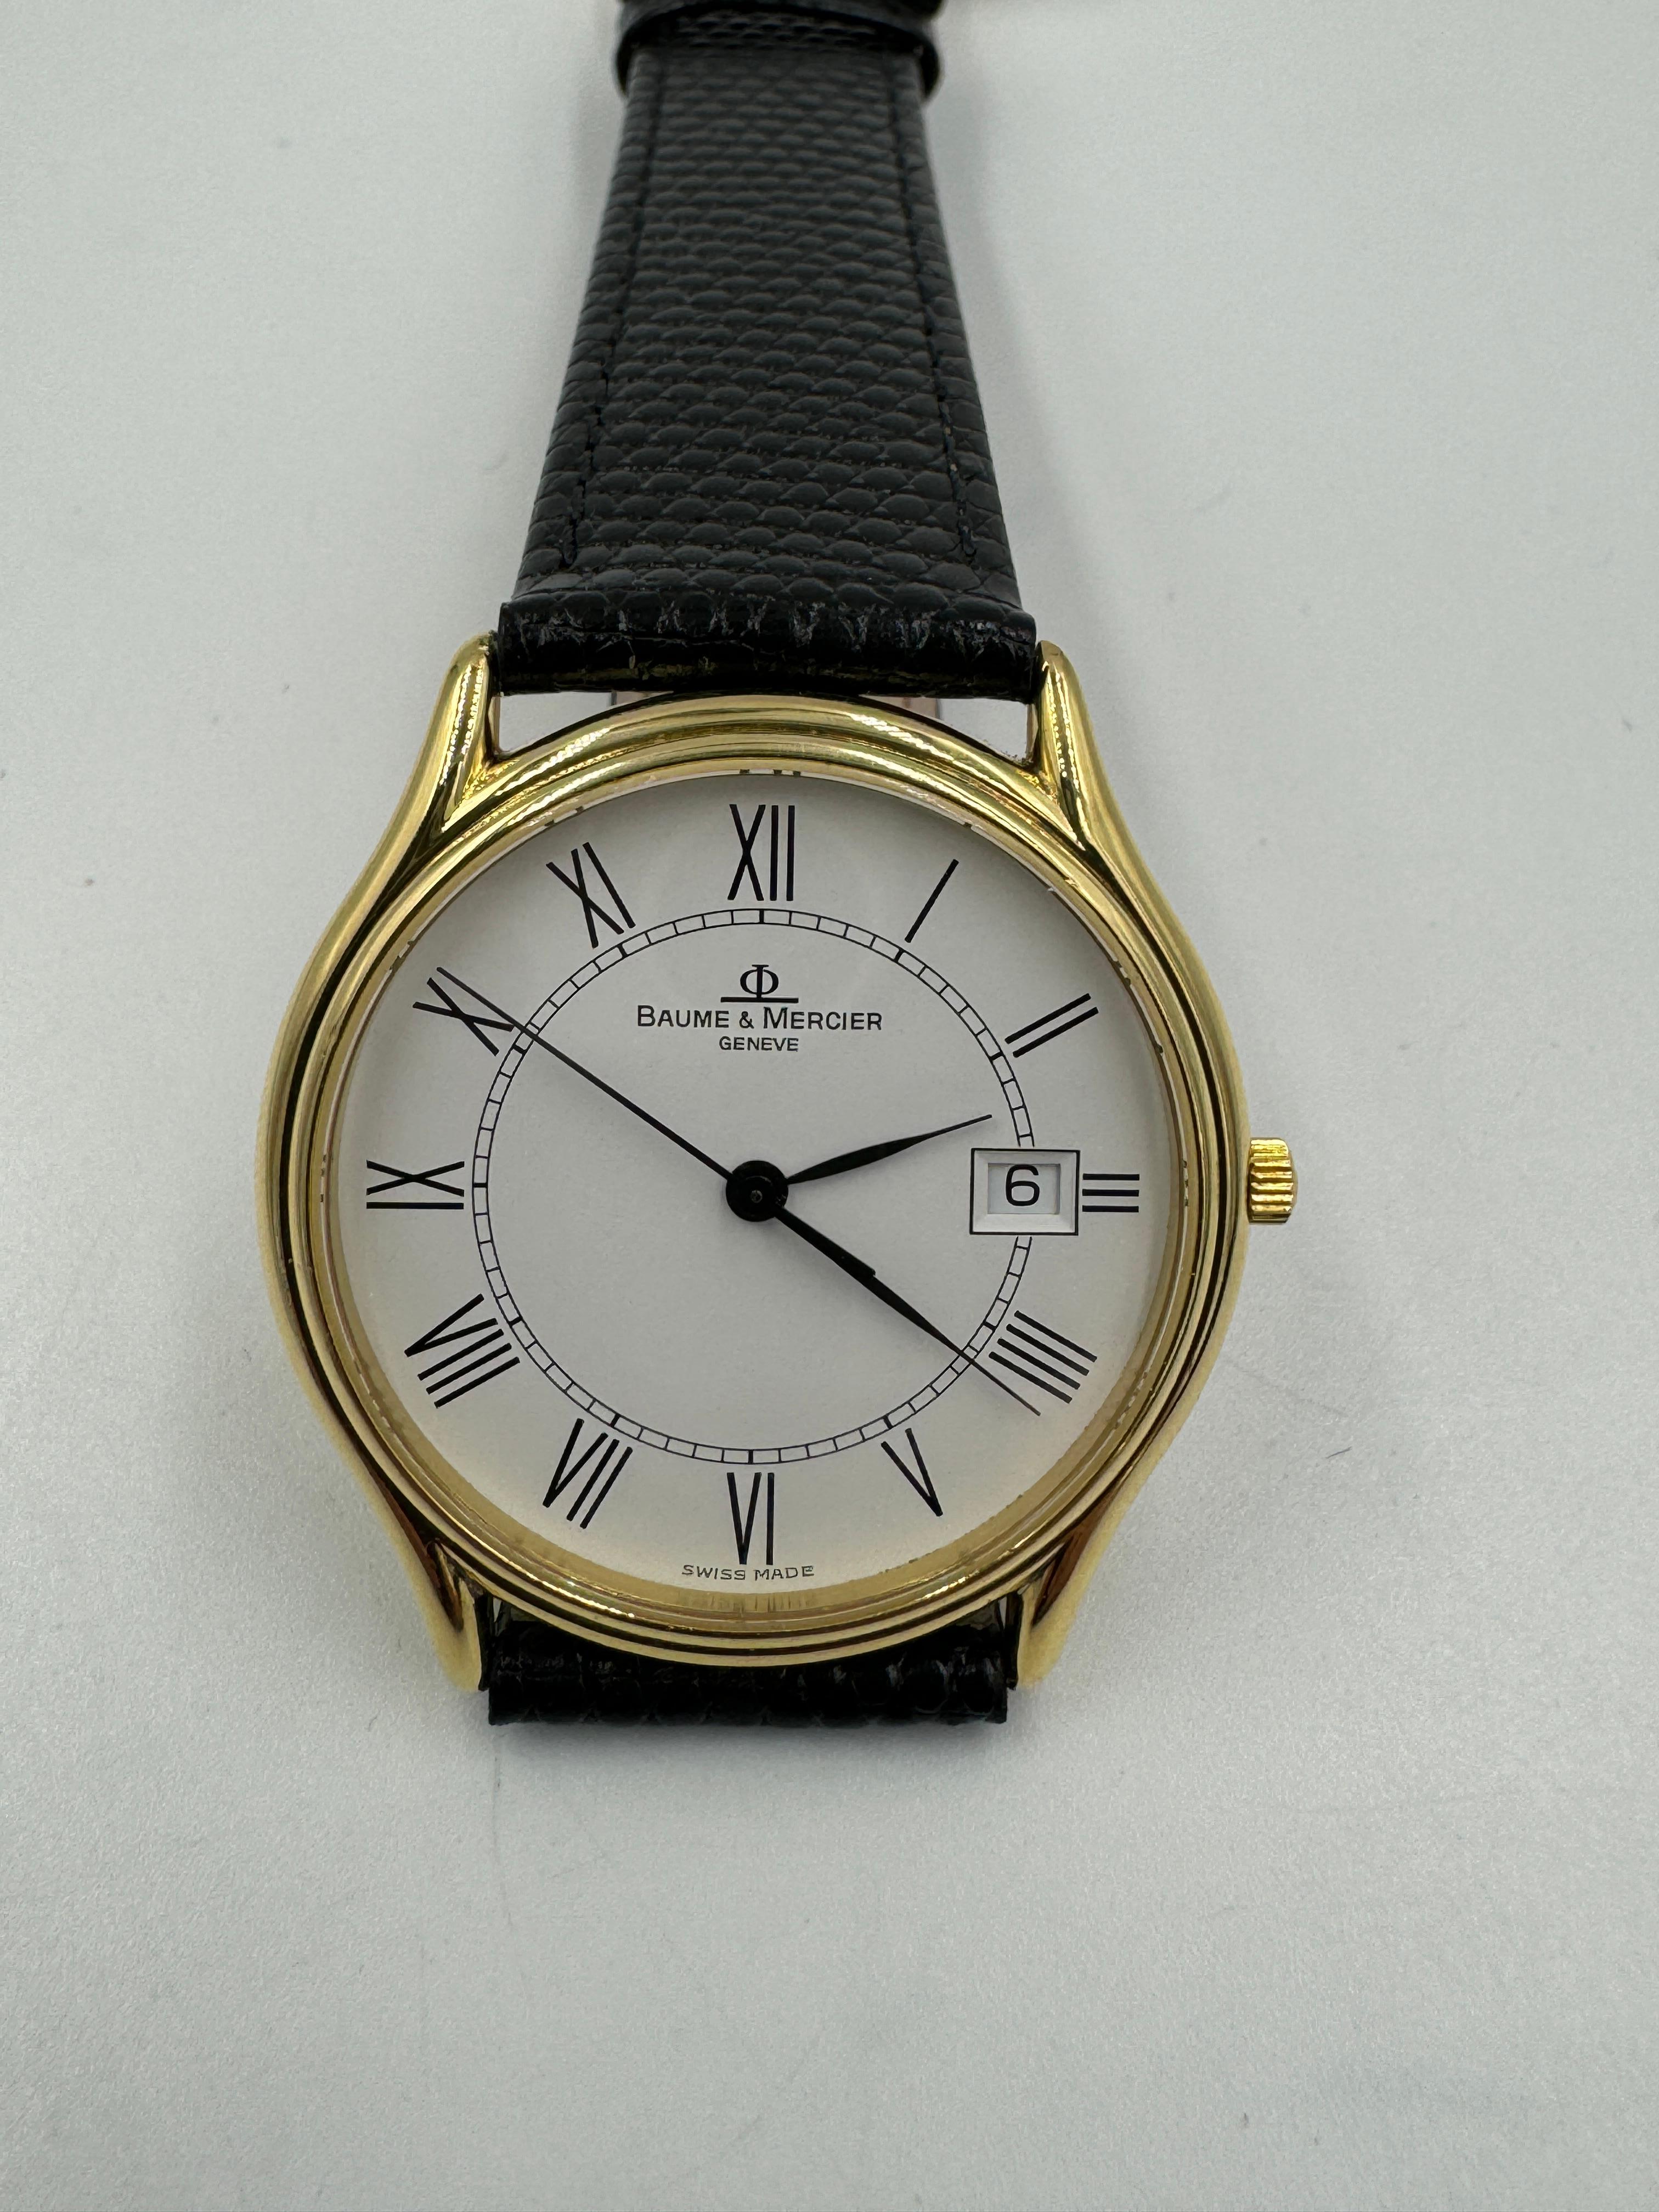 Baume & Mercier quartz yellow gold wristwatch, circa 1980.

In the 1980s, Baume & Mercier released a stunning yellow gold quartz wristwatch that quickly became a symbol of luxury and sophistication. Crafted with precision and attention to detail,